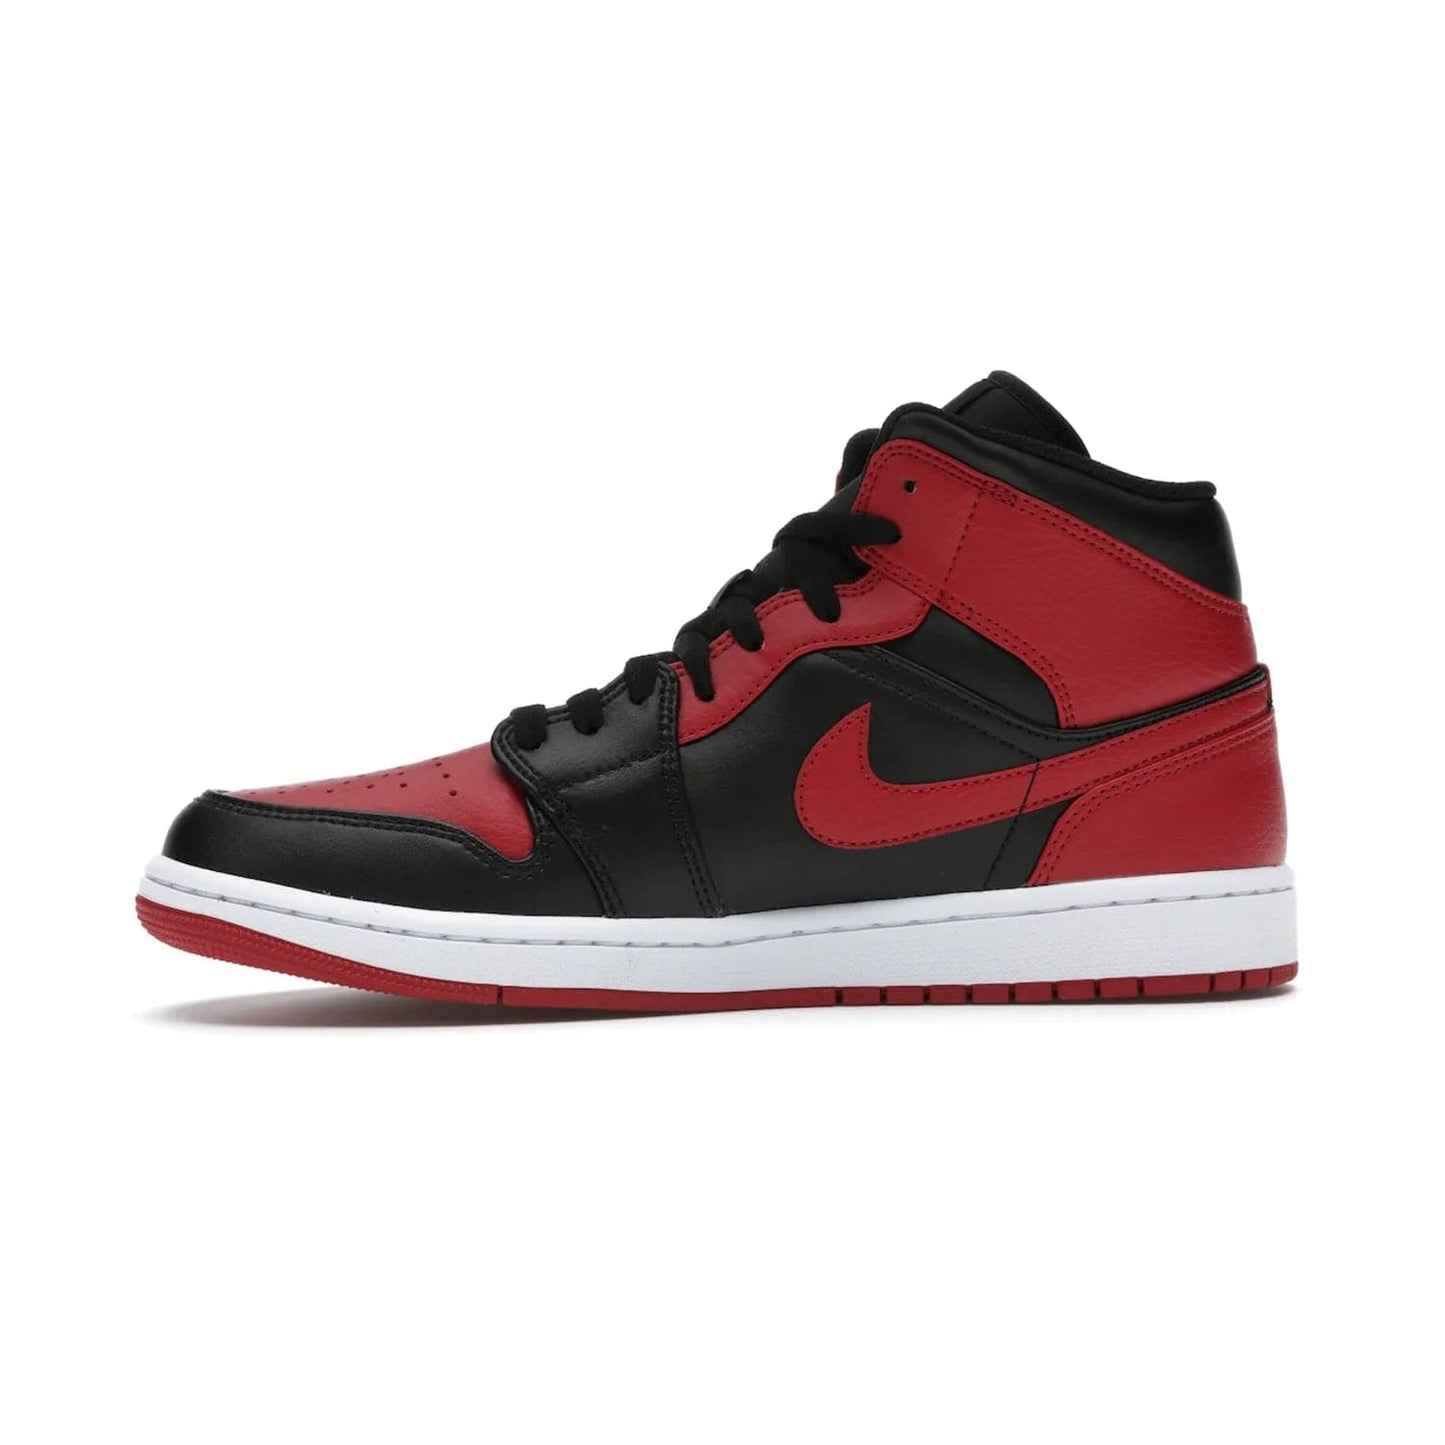 Jordan 1 Mid Banned (2020) - Image 18 - Only at www.BallersClubKickz.com - The Air Jordan 1 Mid Banned (2020) brings a modern twist to the classic Banned colorway. Features full-grain black and red leather uppers, red leather around the toe, collar, heel, & Swoosh. Release November 2021 for $110.